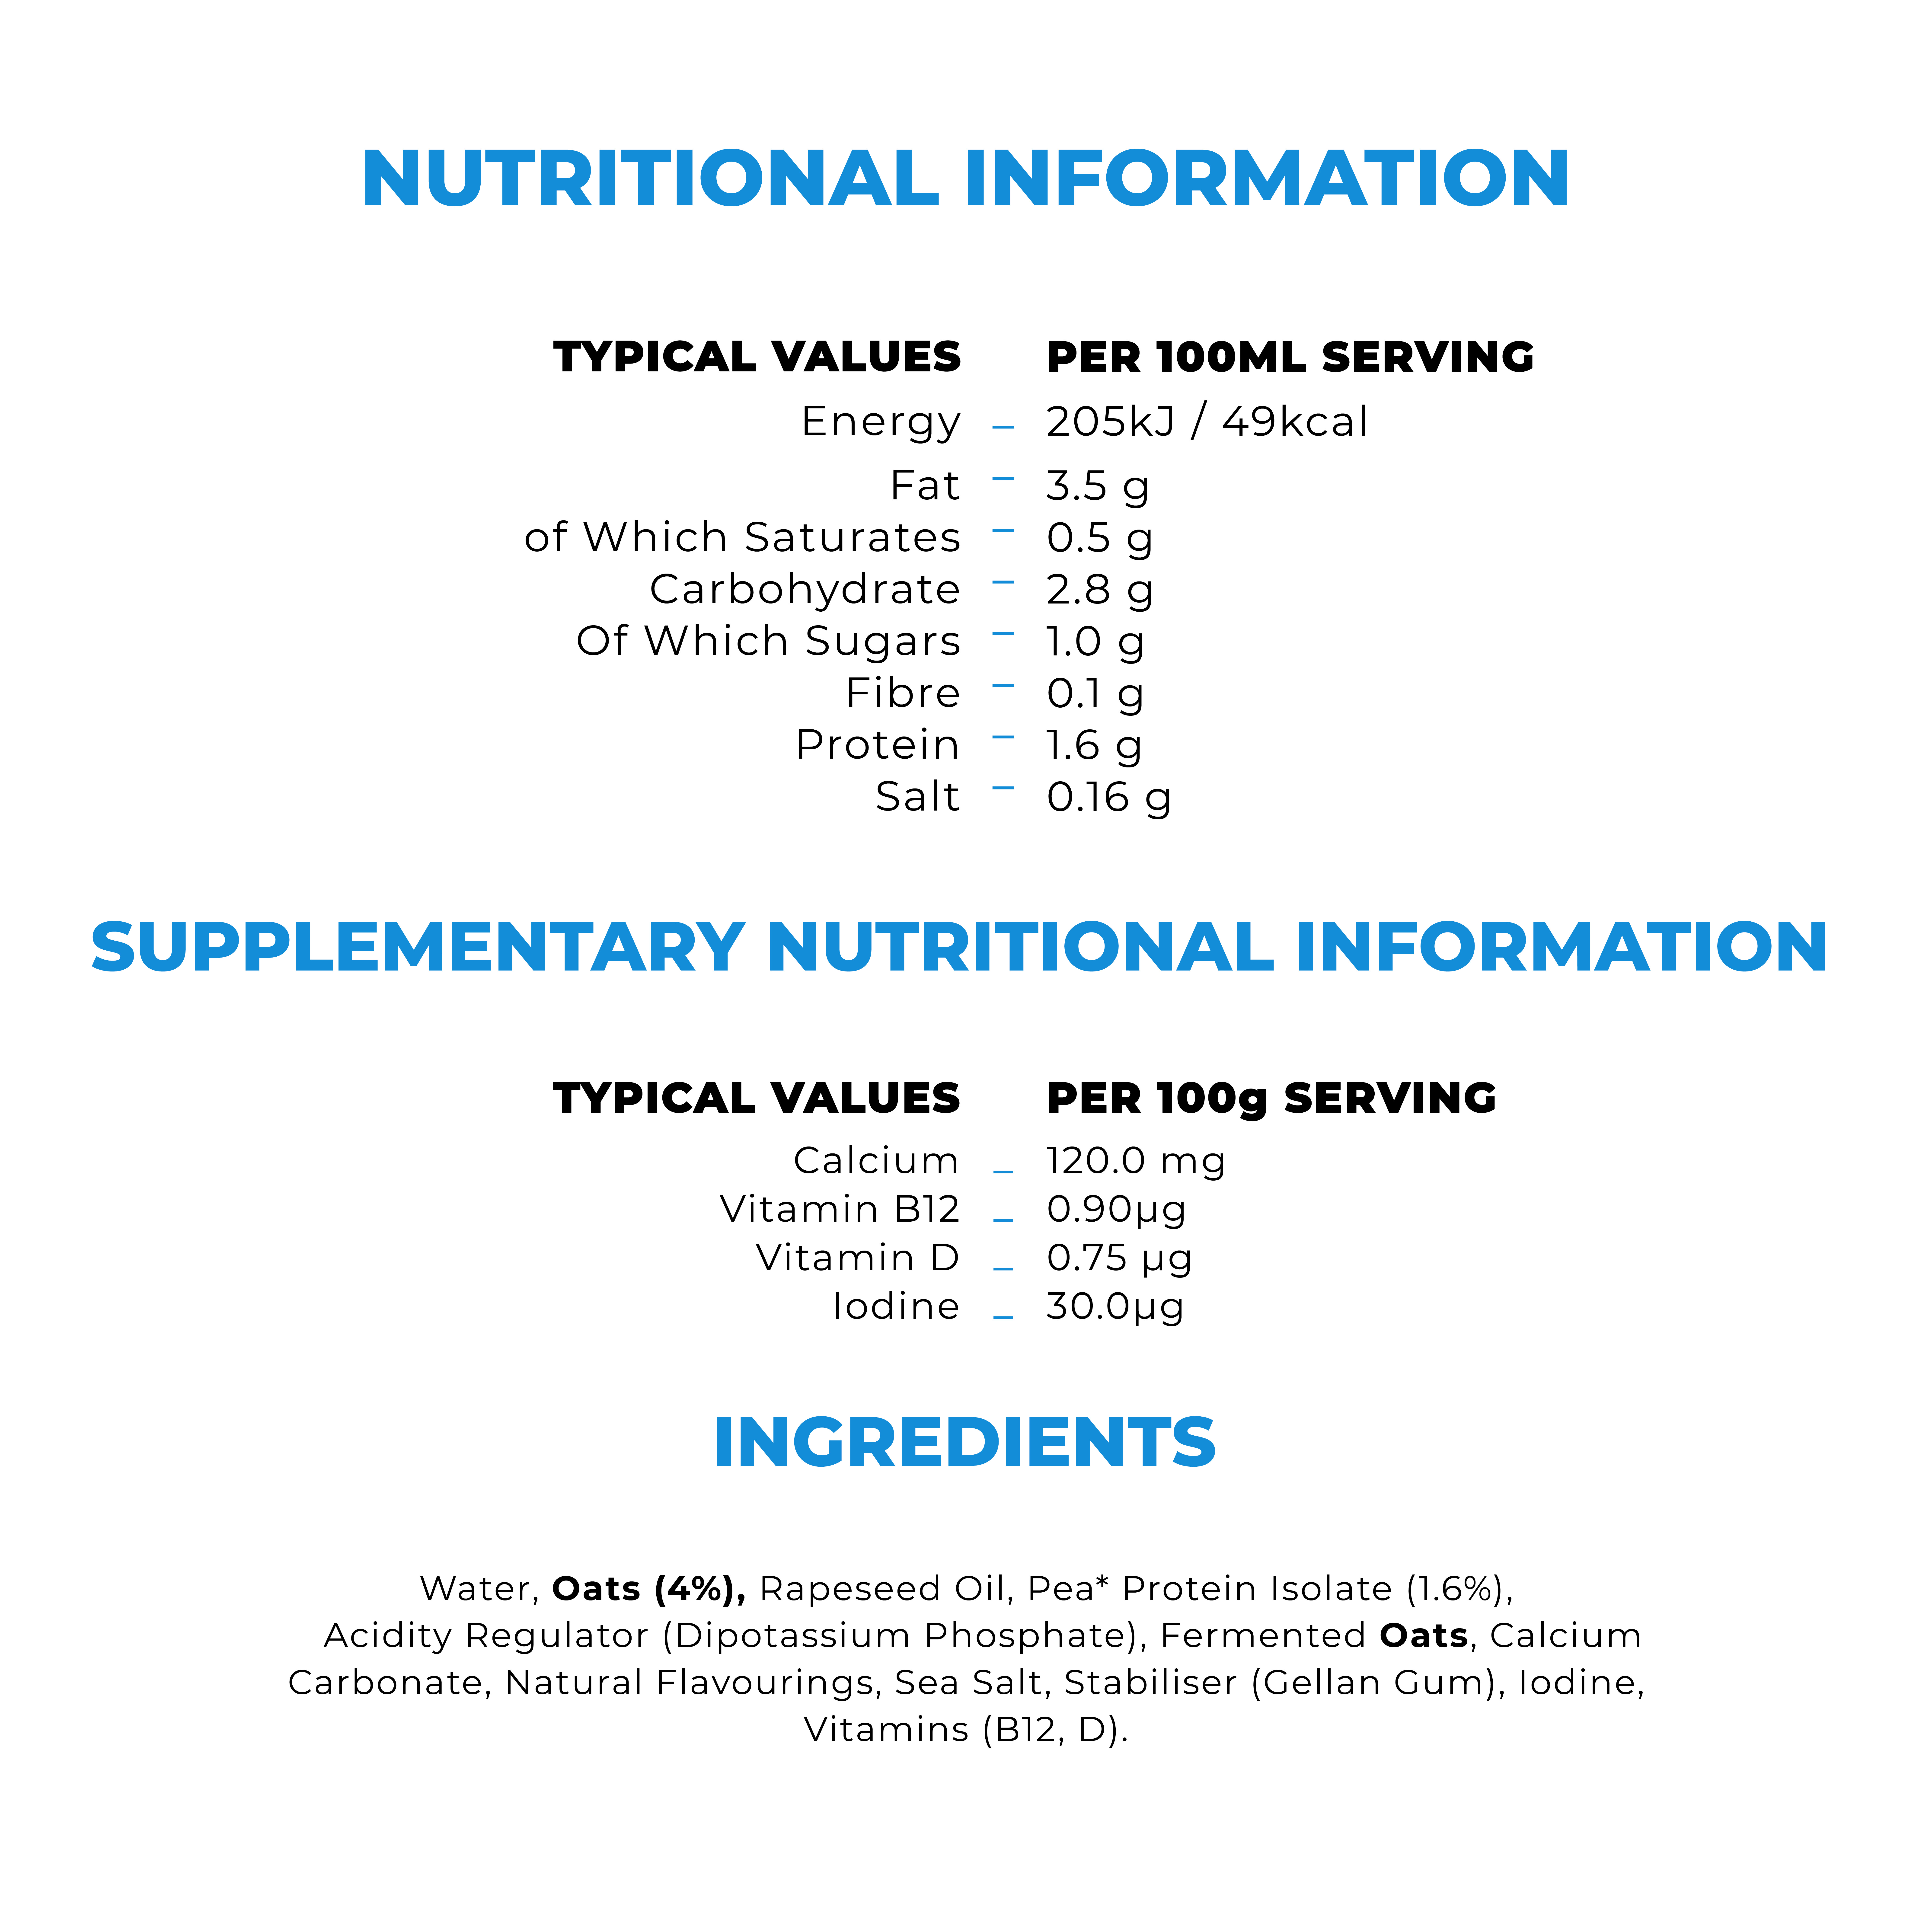 NUTRITIONAL INFORMATION

                                  TYPICAL VALUES PER 100ML SERVING

                                  Energy 205kJ / 49kcal

                                  Fat 3.5 g

                                  Salt - 0.16 g

                                  of Which Saturates 0.5 g

                                  Carbohydrate 2.8 g

                                  Of Which Sugars 1.0 g

                                  Fibre 0.1 g

                                  Protein 1.6 g

                                  SUPPLEMENTARY NUTRITIONAL INFORMATION

                                  TYPICAL VALUES PER 100g SERVING

                                  Calcium 120.0 mg

                                  Vitamin B12 0.90μg

                                  Vitamin D 0.75 μg

                                  lodine 30.0µg

                                  INGREDIENTS

                                  Water, Oats (4%), Rapeseed Oil, Pea* Protein Isolate (1.6%),

                                  Acidity Regulator (Dipotassium Phosphate), Fermented Oats, Calcium

                                  Carbonate, Natural Flavourings, Sea Salt, Stabiliser (Gellan Gum), lodine,

                                  Vitamins (B12, D).